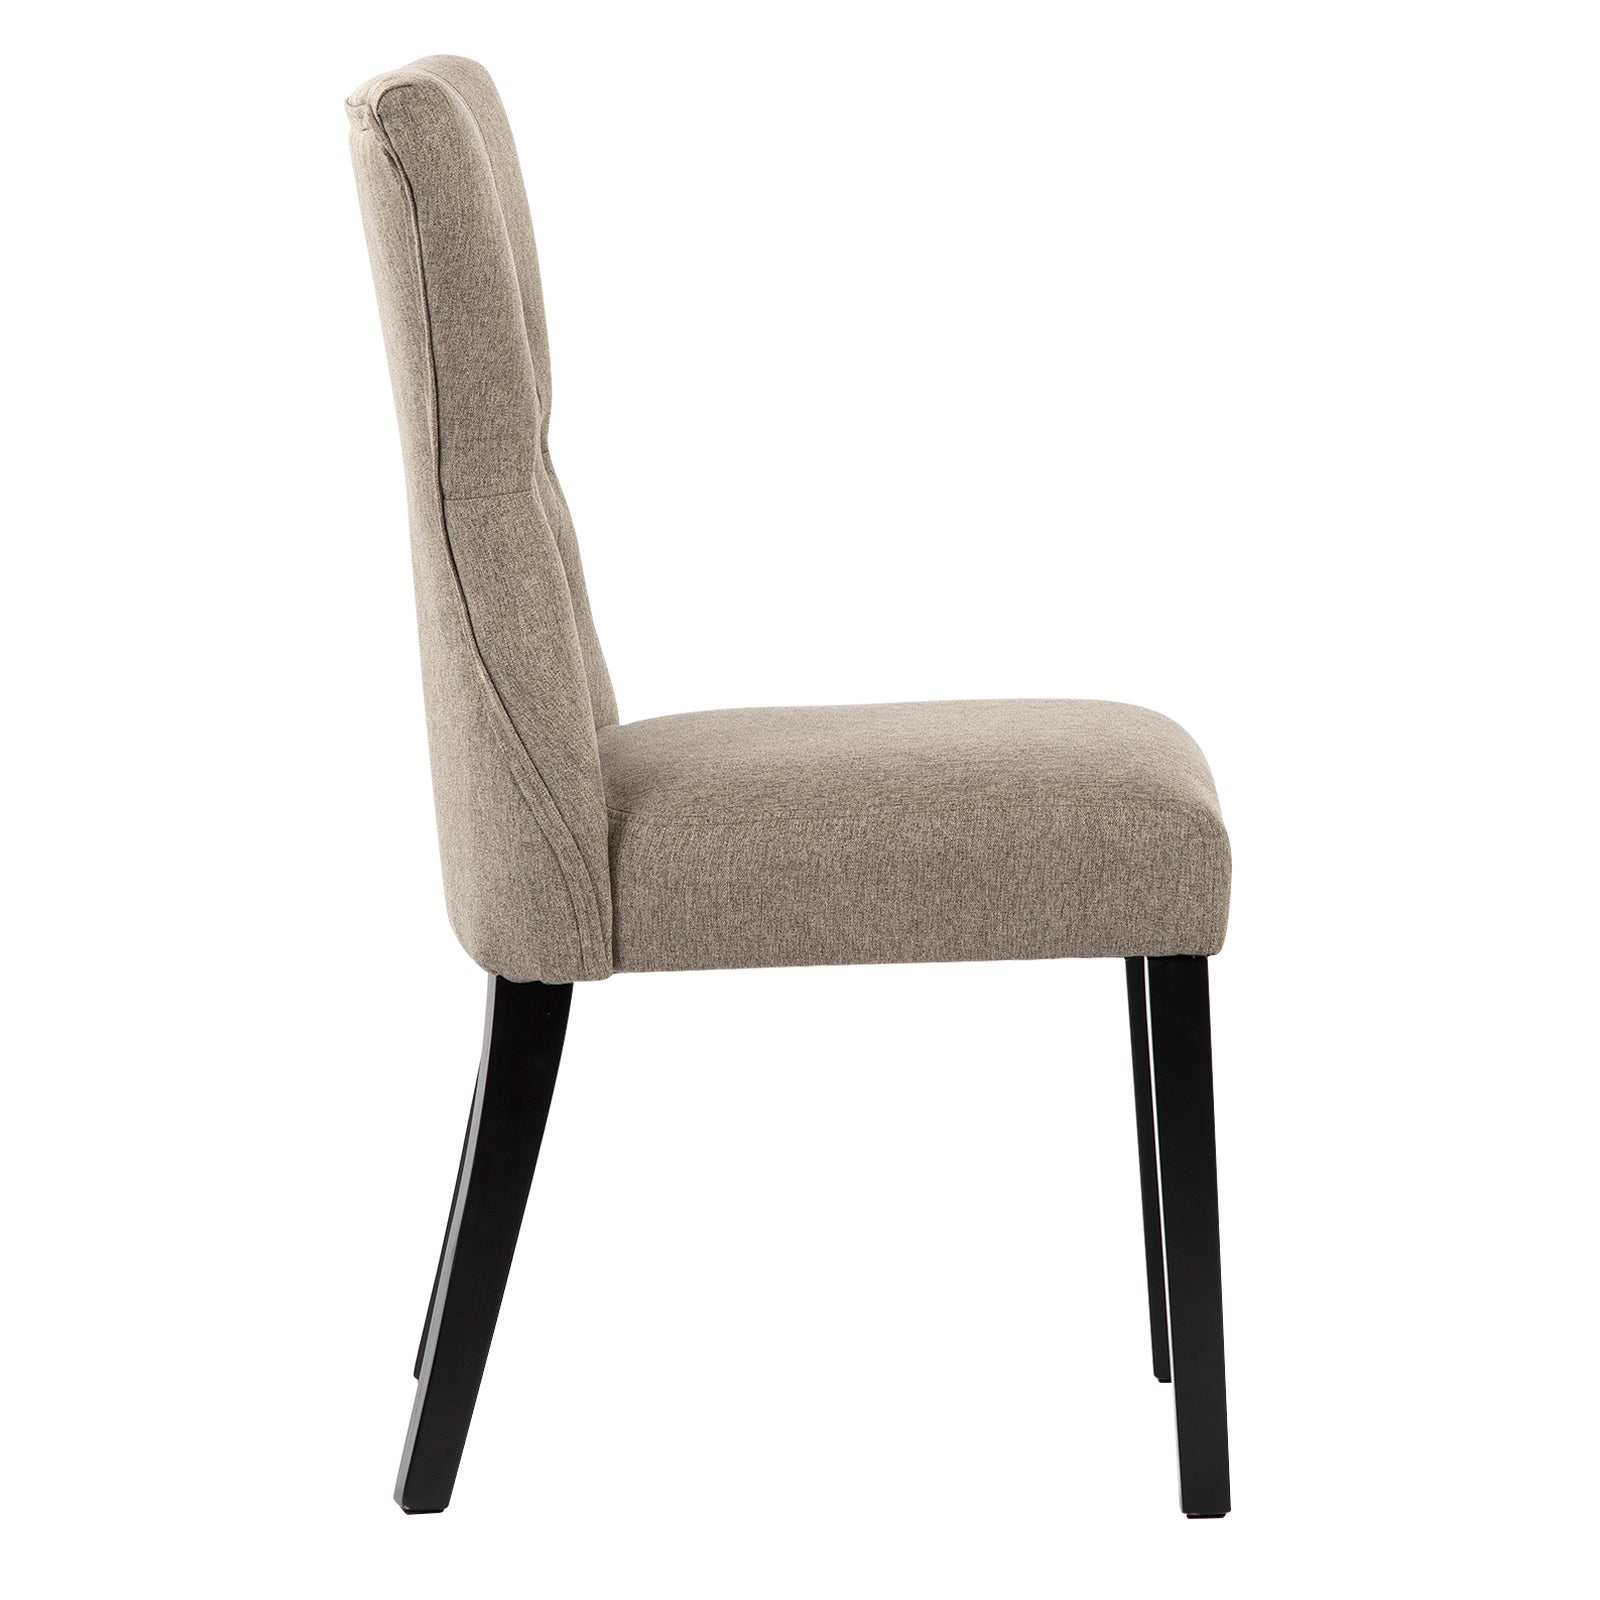 Sourcemax Dining Chairs